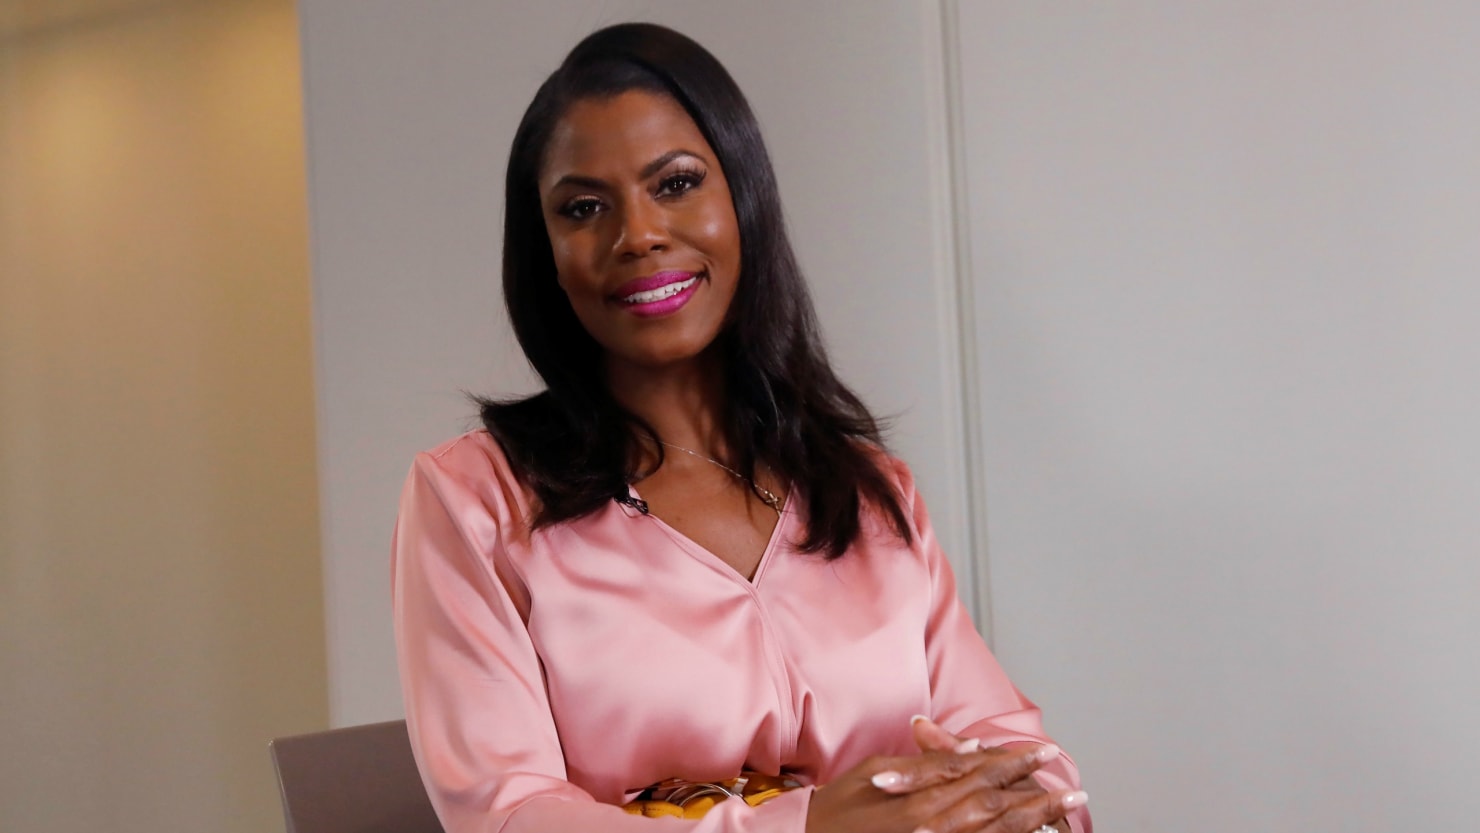 Omarosa On Tape Lara Trump Offered Me 15k To Be ‘positive About Trump